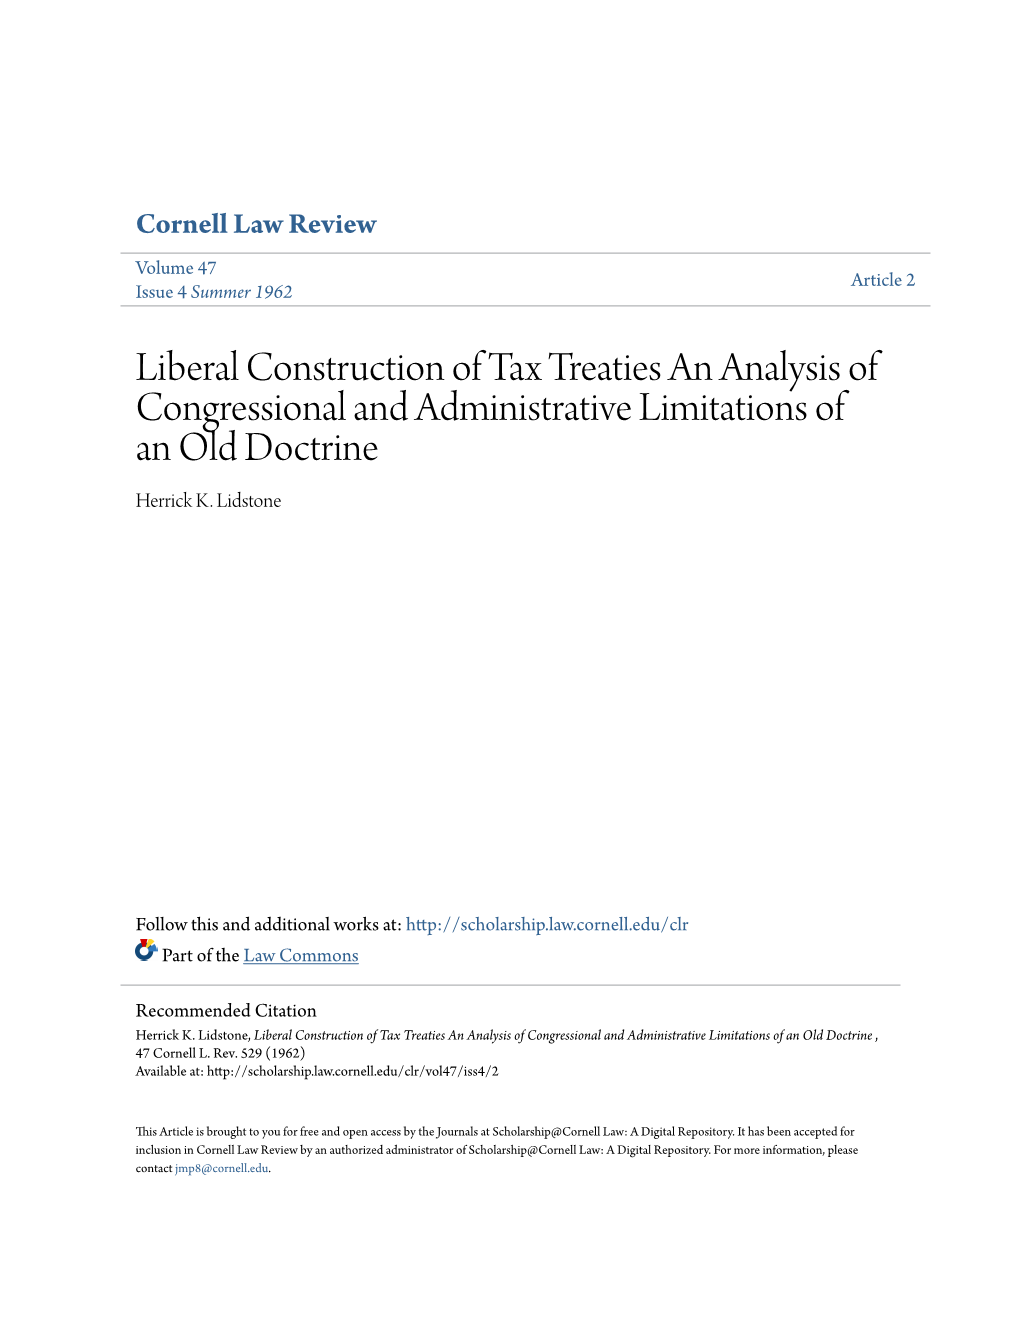 Liberal Construction of Tax Treaties an Analysis of Congressional and Administrative Limitations of an Old Doctrine Herrick K